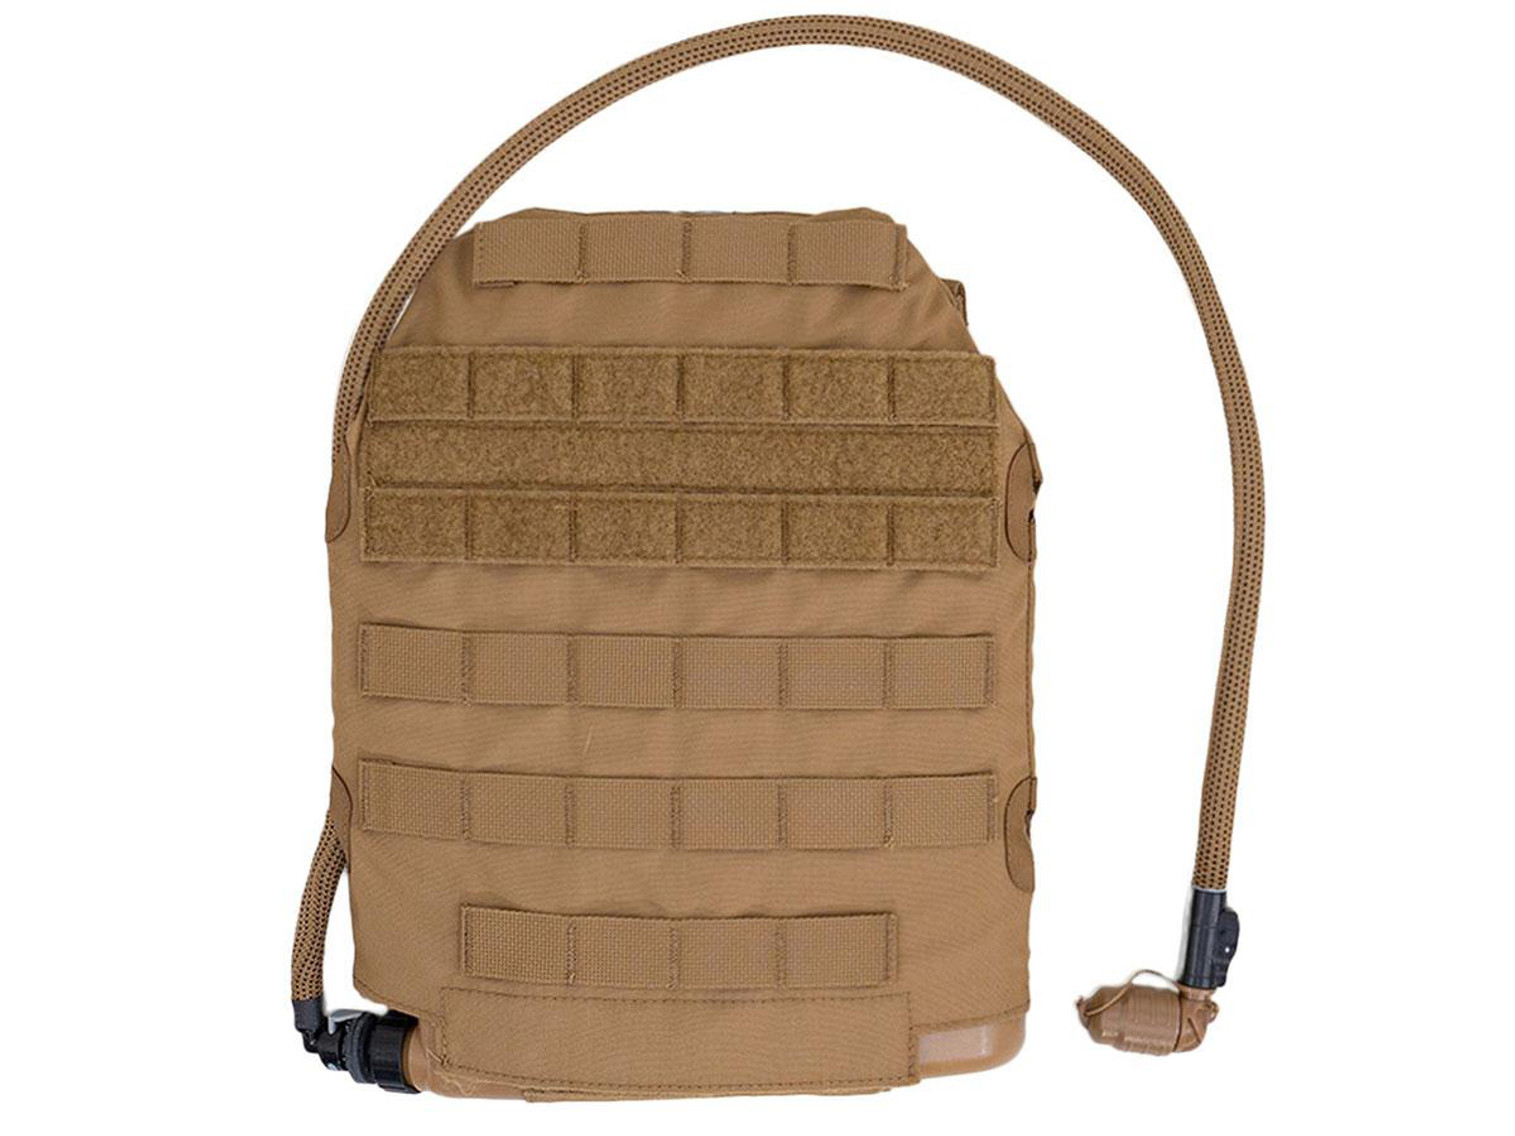 Qore Performance IMS Combo MOLLE Sleeve + IcePlate Curve MOLLE Plate Carrier Hydration System